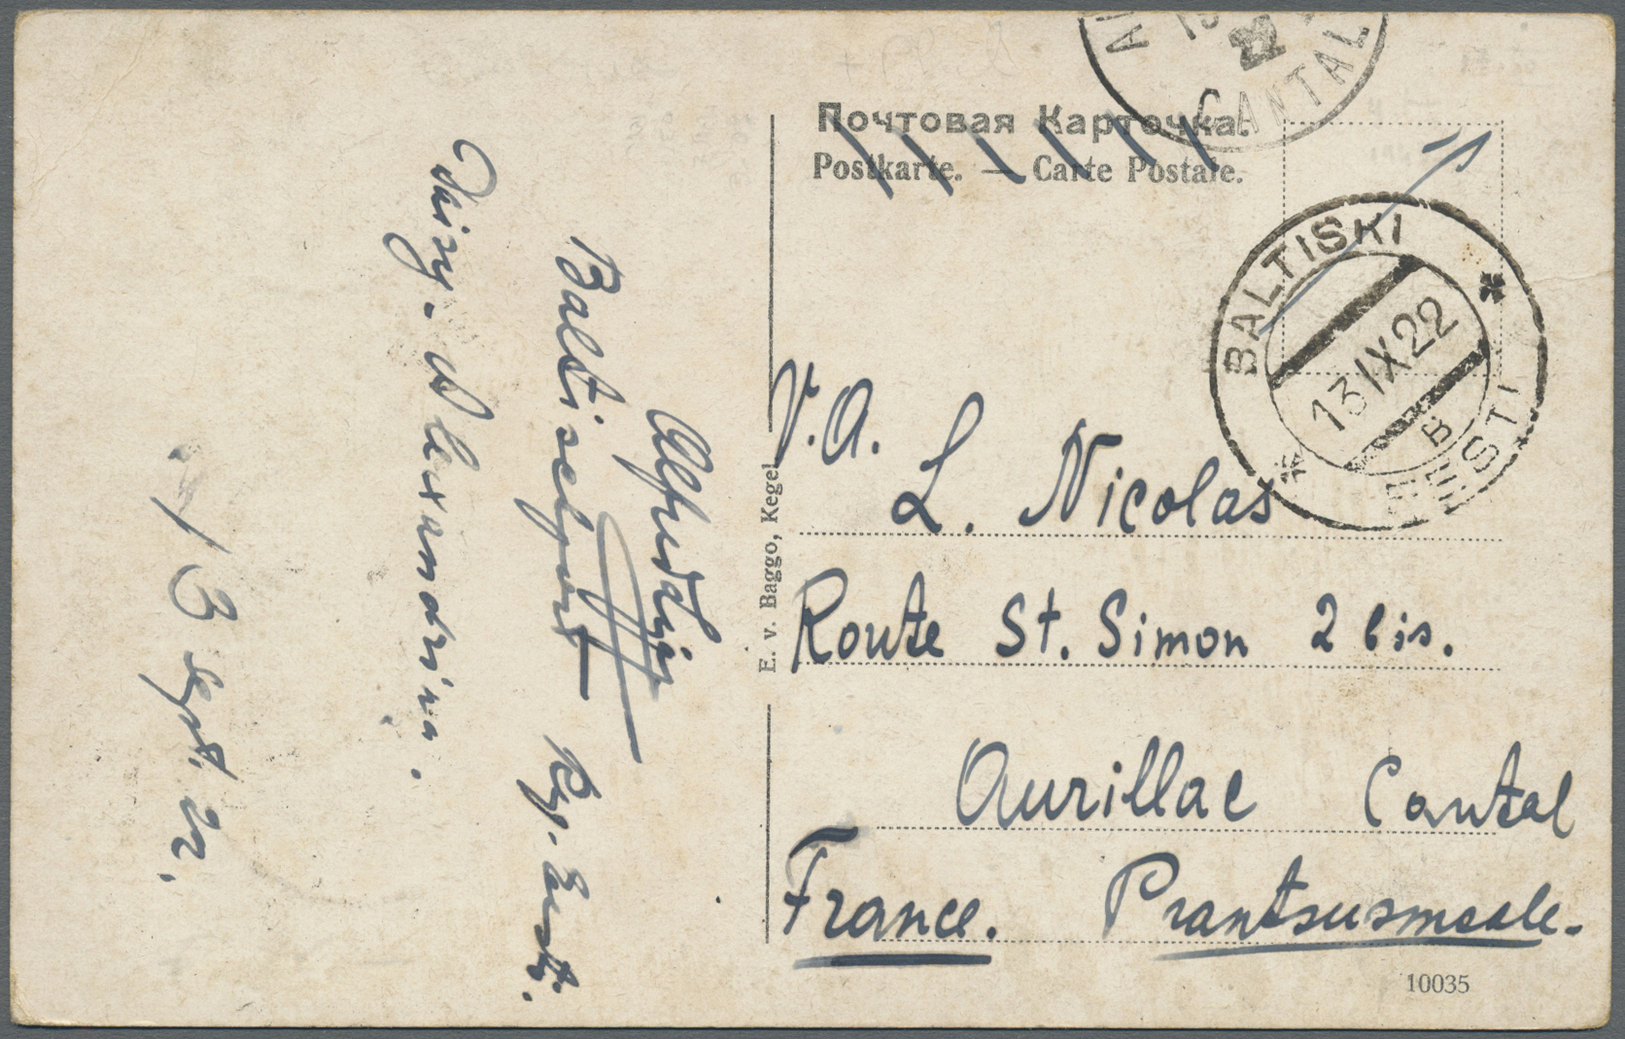 Br Estland: 1919/1922, Three Covers And One Souvenier Postcard With Local Postmaster Perforation Stamps From PAID - Estonia